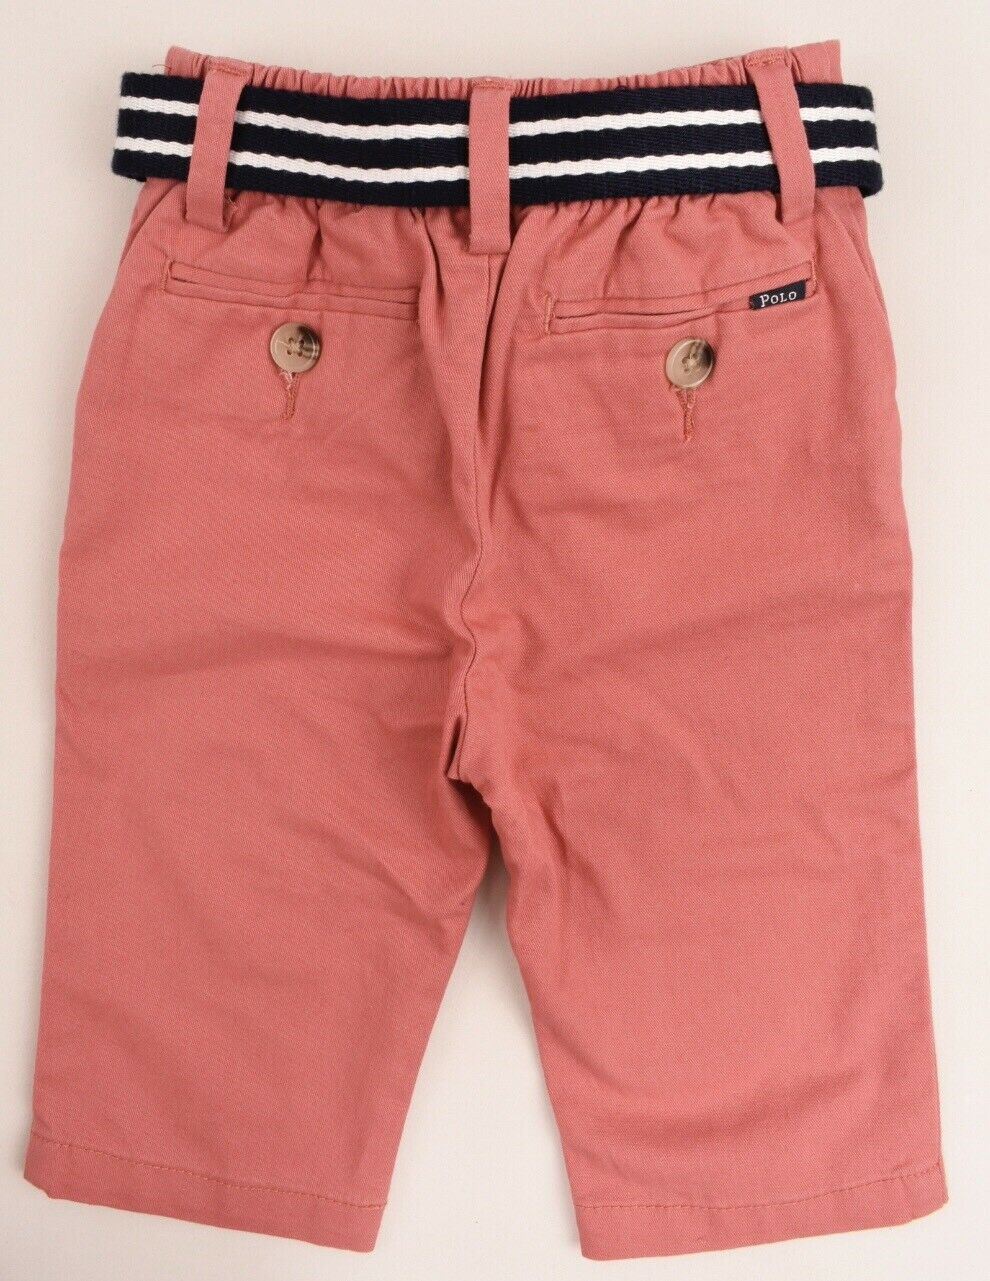 RALPH LAUREN Baby Boys Belted Chino Shorts Dusty Red size 3 months size 6 months